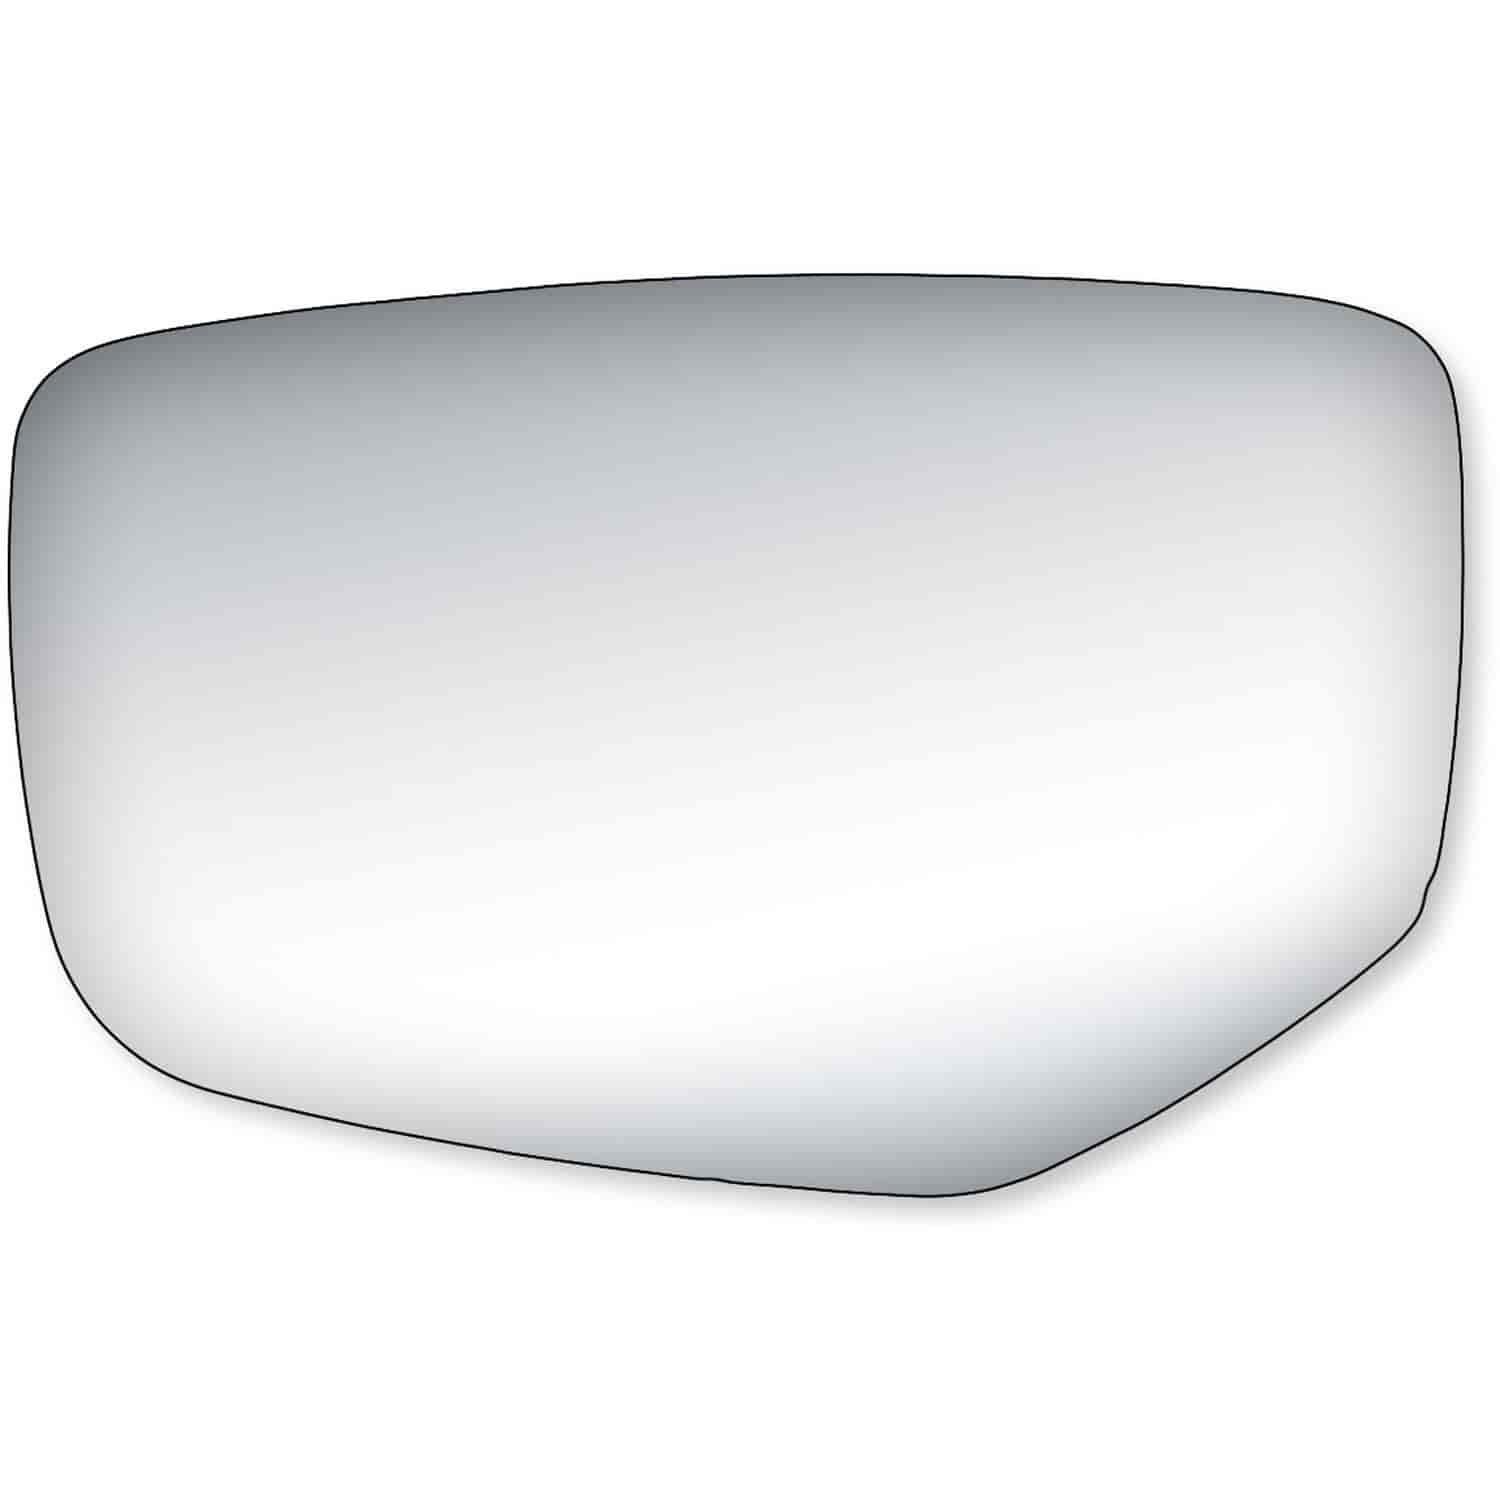 Replacement Glass for 13-14 Accord w/out turn signal & blind spot lens the glass measures 4 3/4 tall